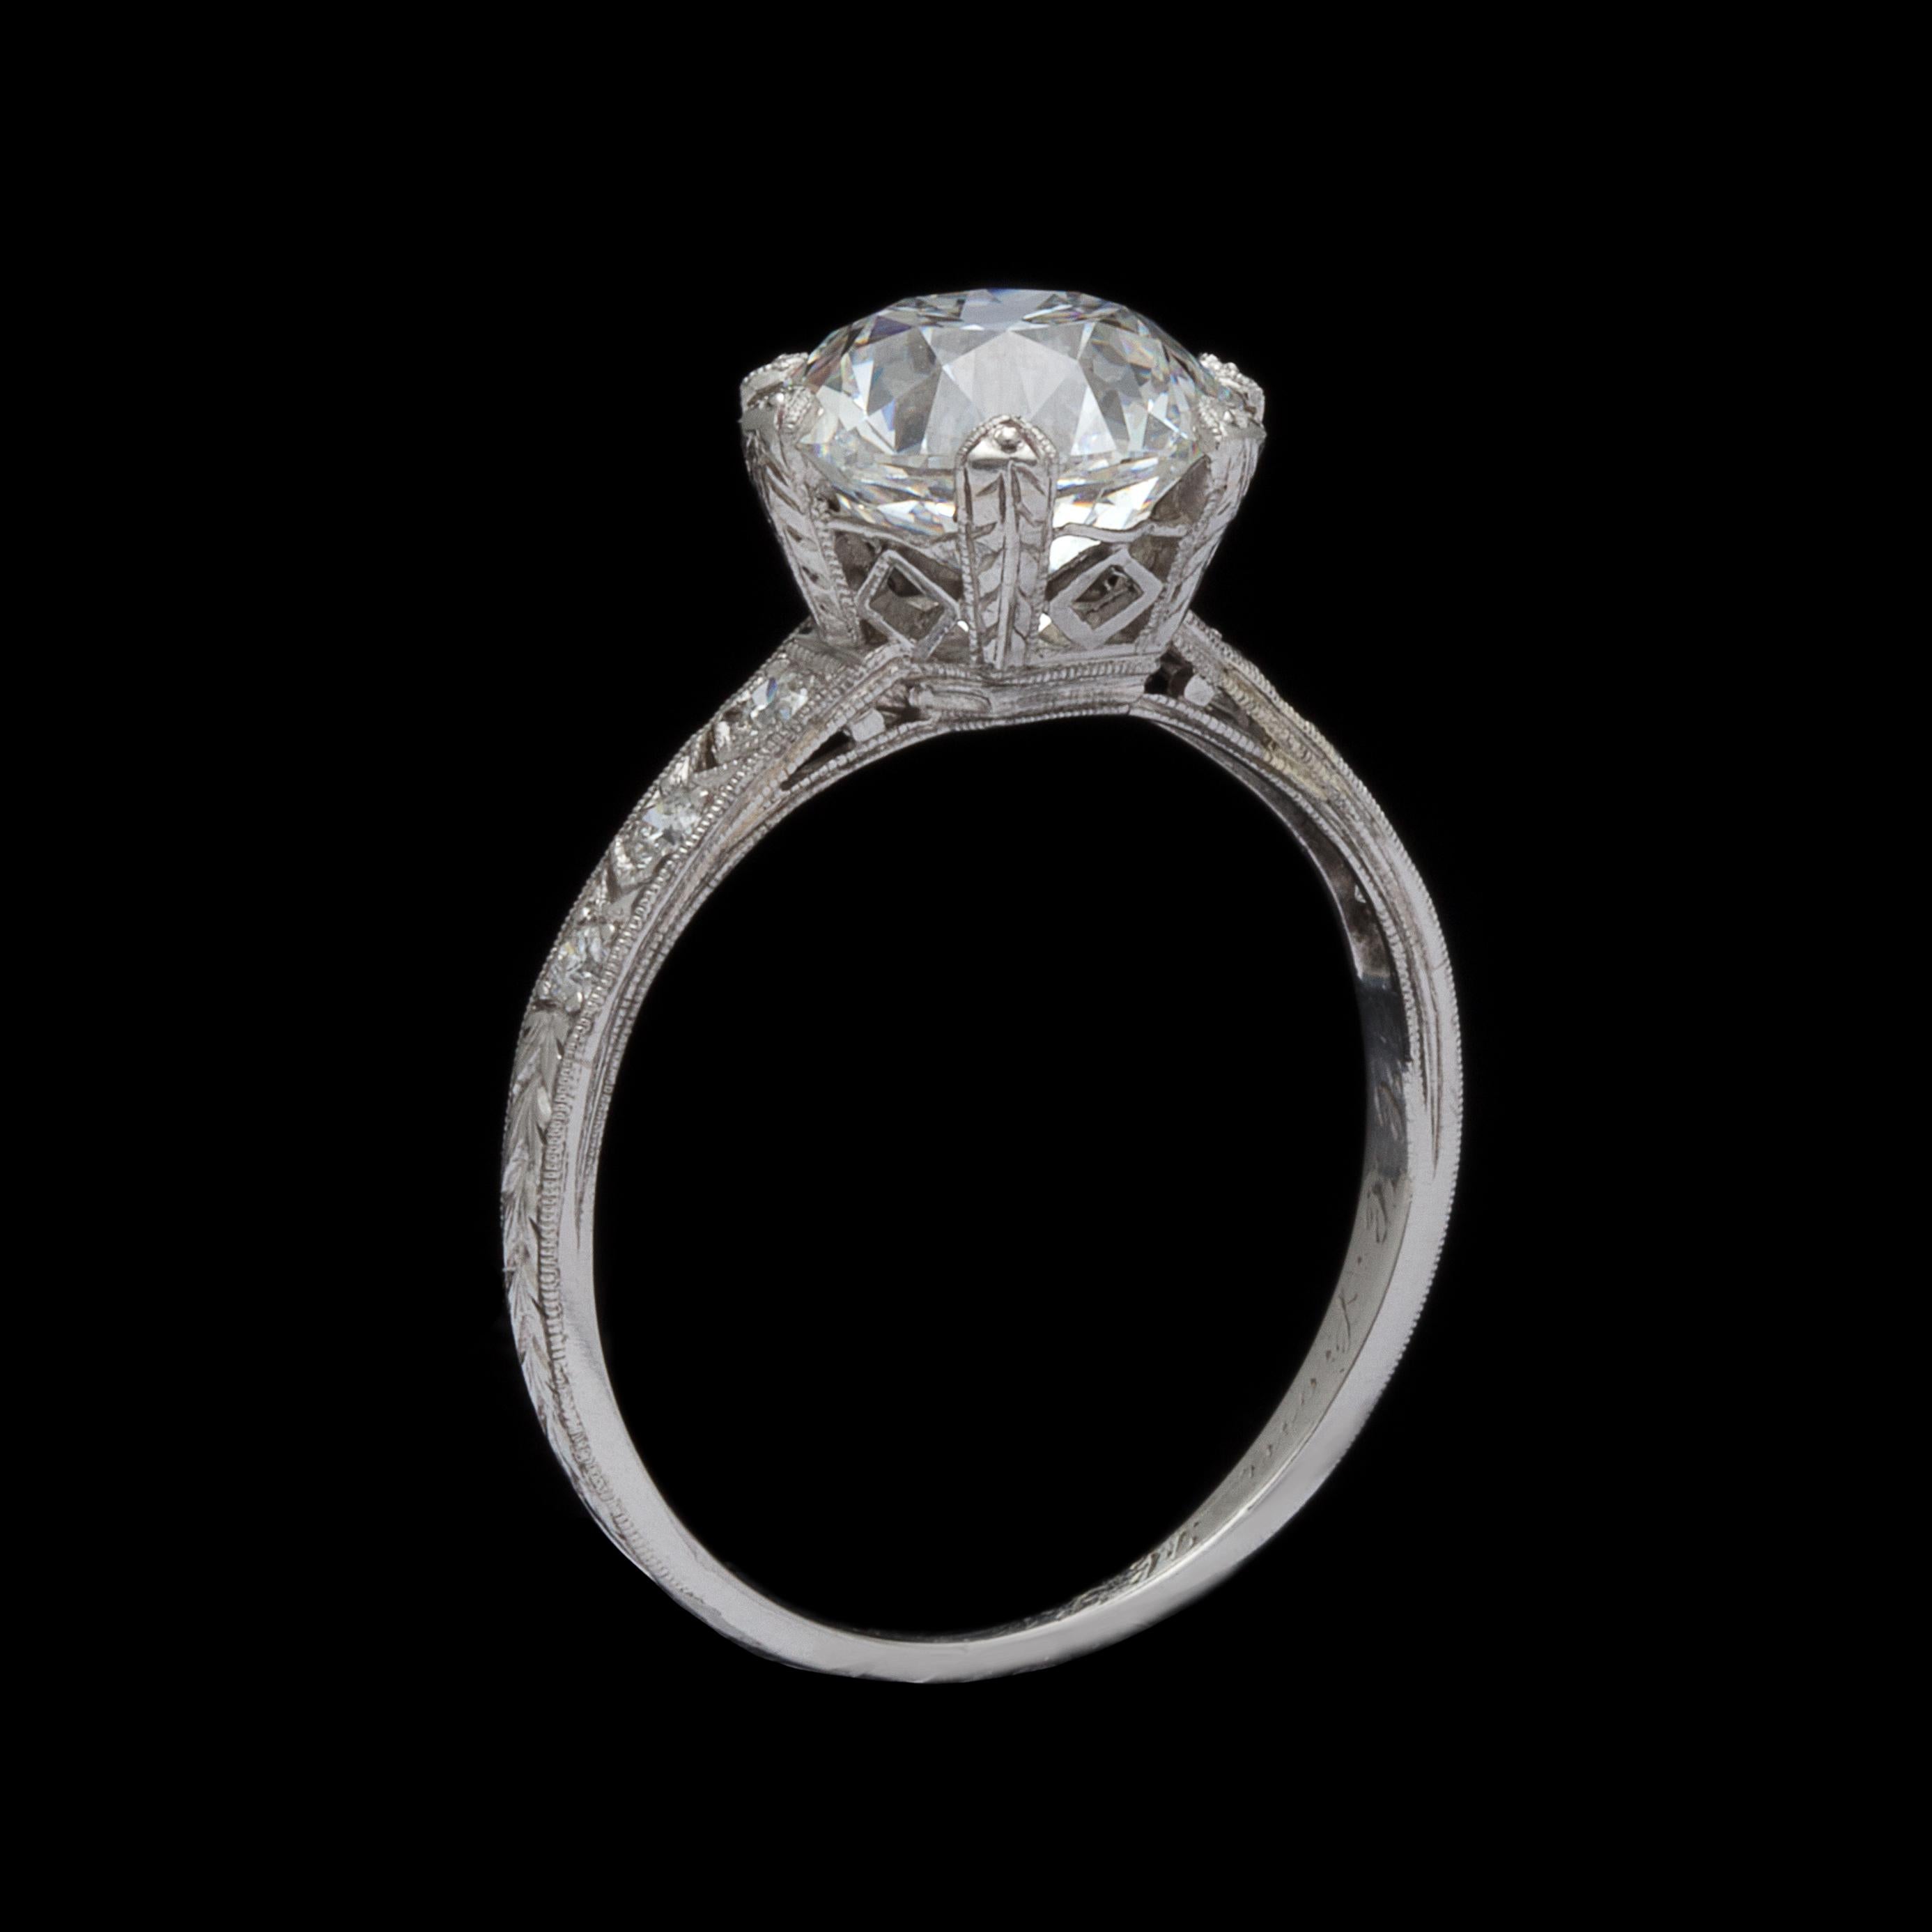 Old European Cut Stunning GIA 3.12 Carat Antique Diamond Ring by Tiffany & Co.